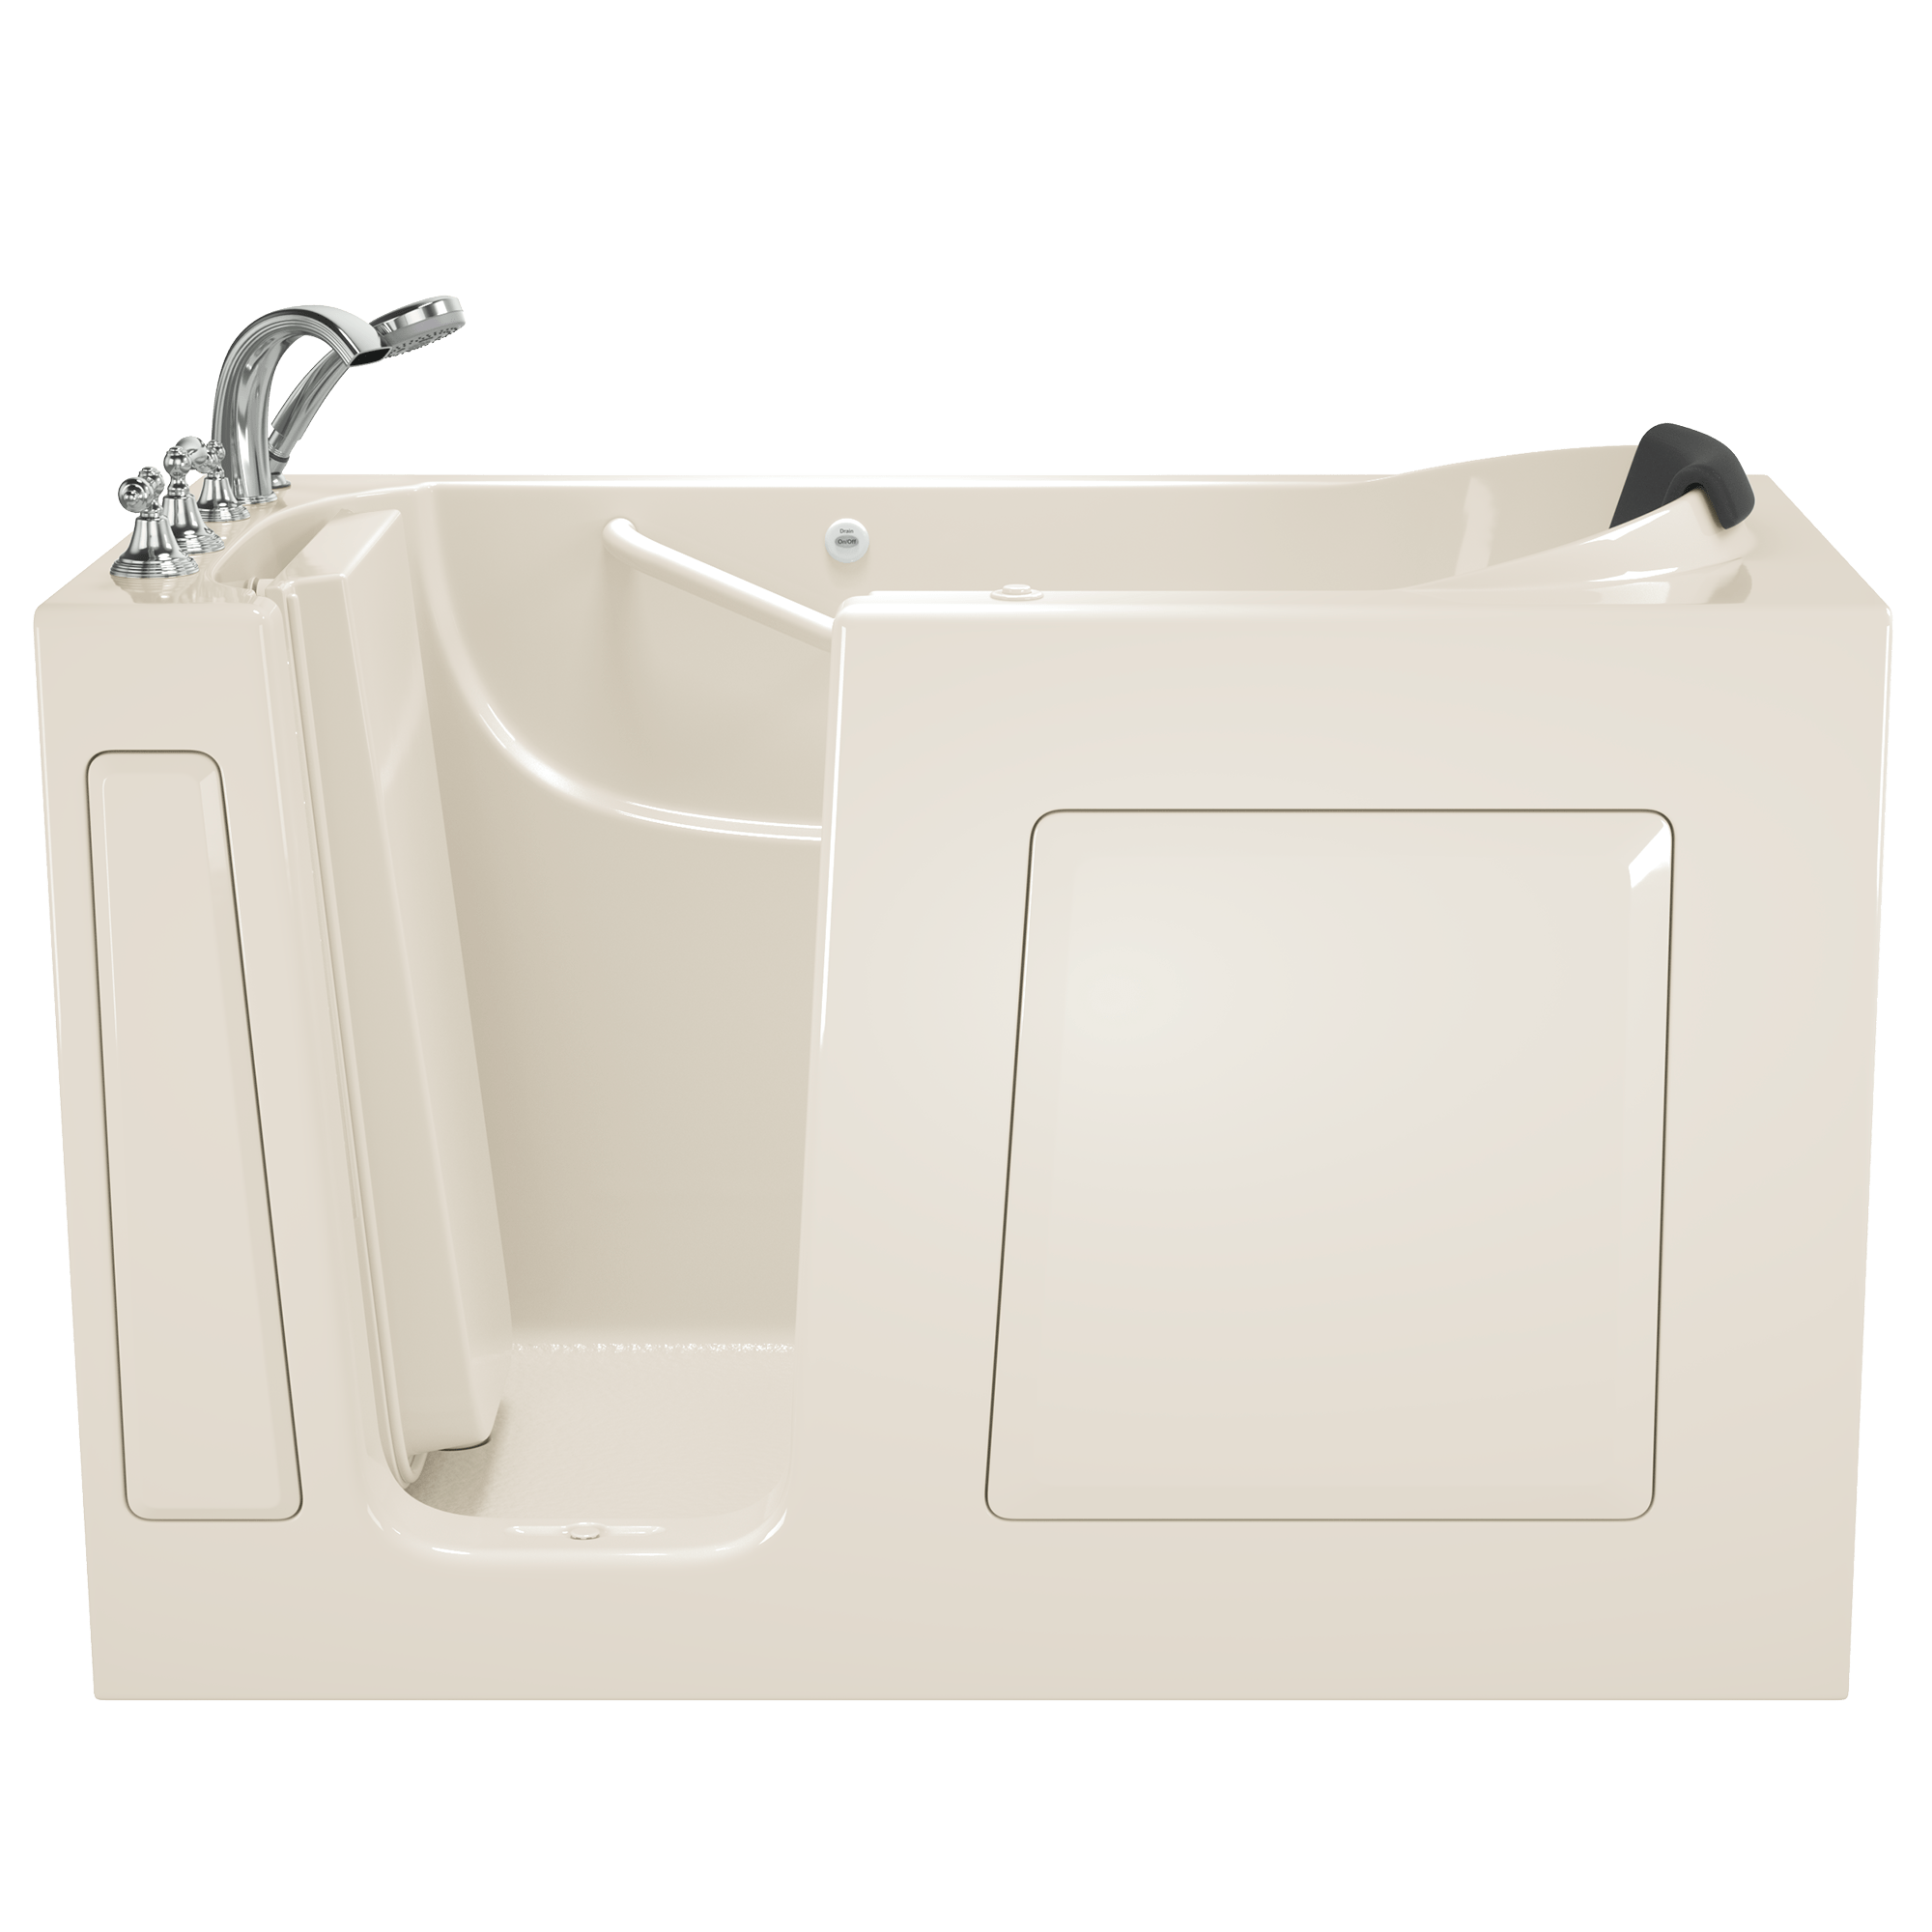 Gelcoat Premium Series 30 x 60 -Inch Walk-in Tub With Air Spa System - Left-Hand Drain With Faucet